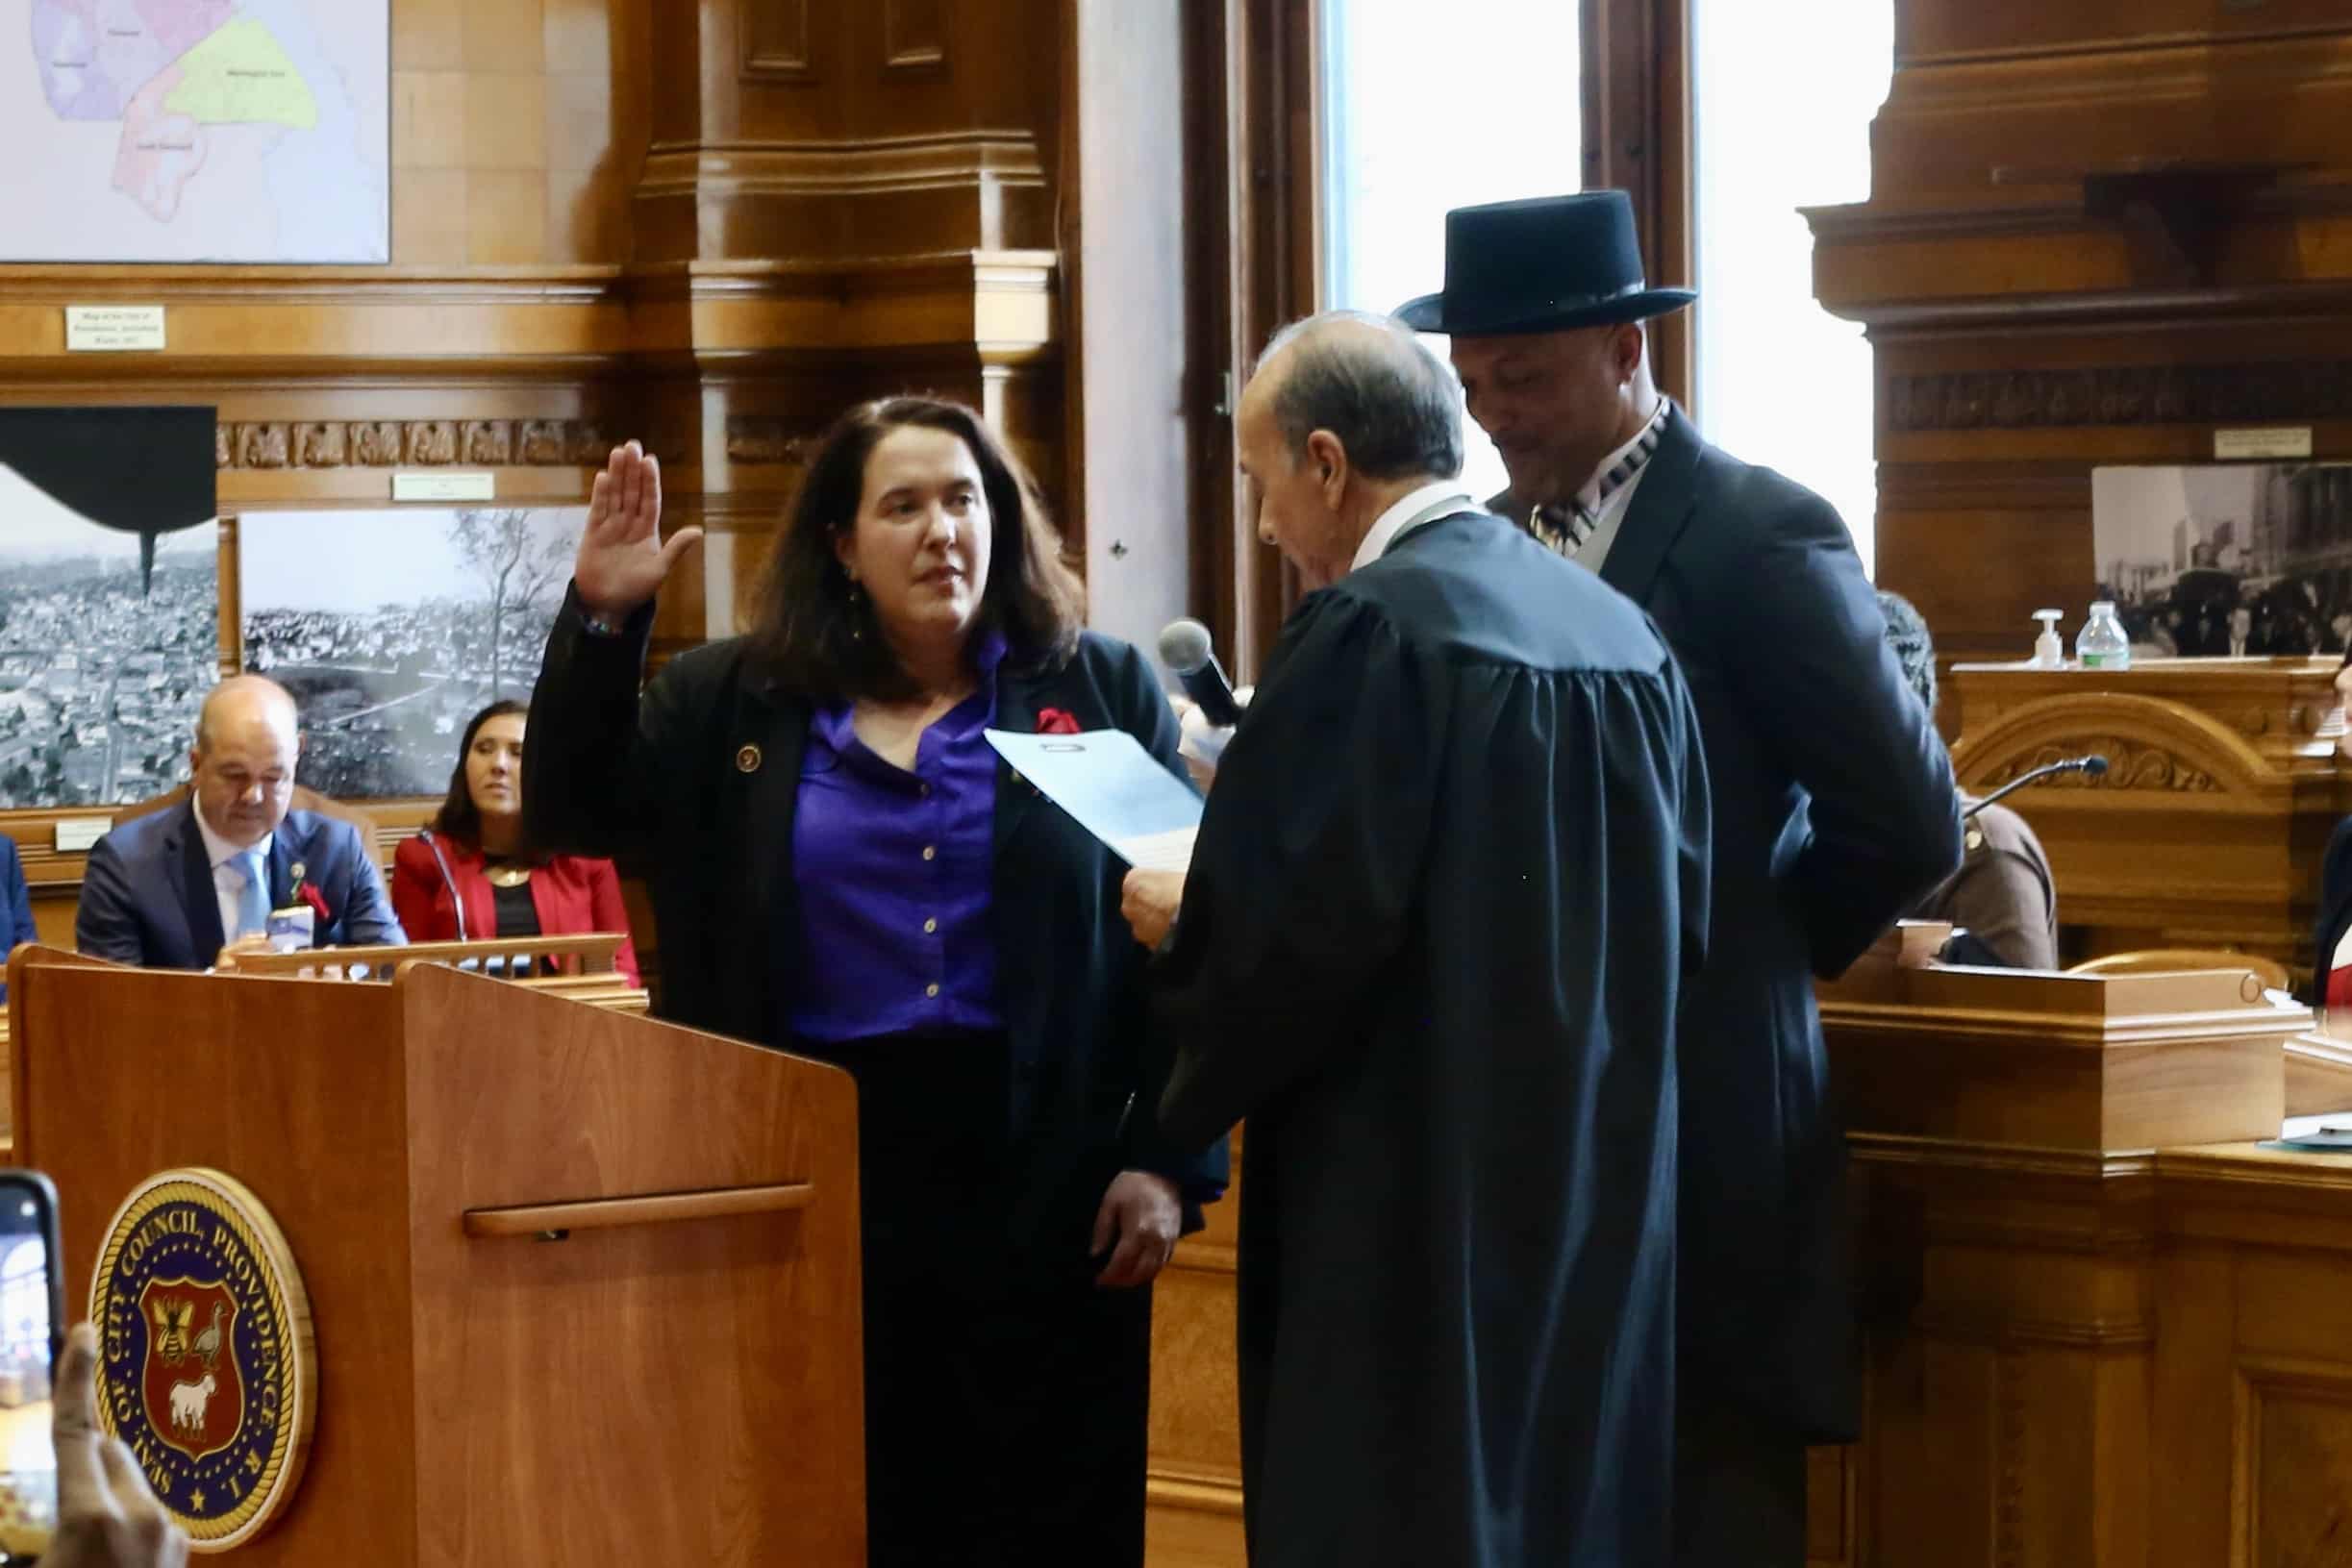 Rhode Island: Rachel Miller elected as Providence City Council President in historic first